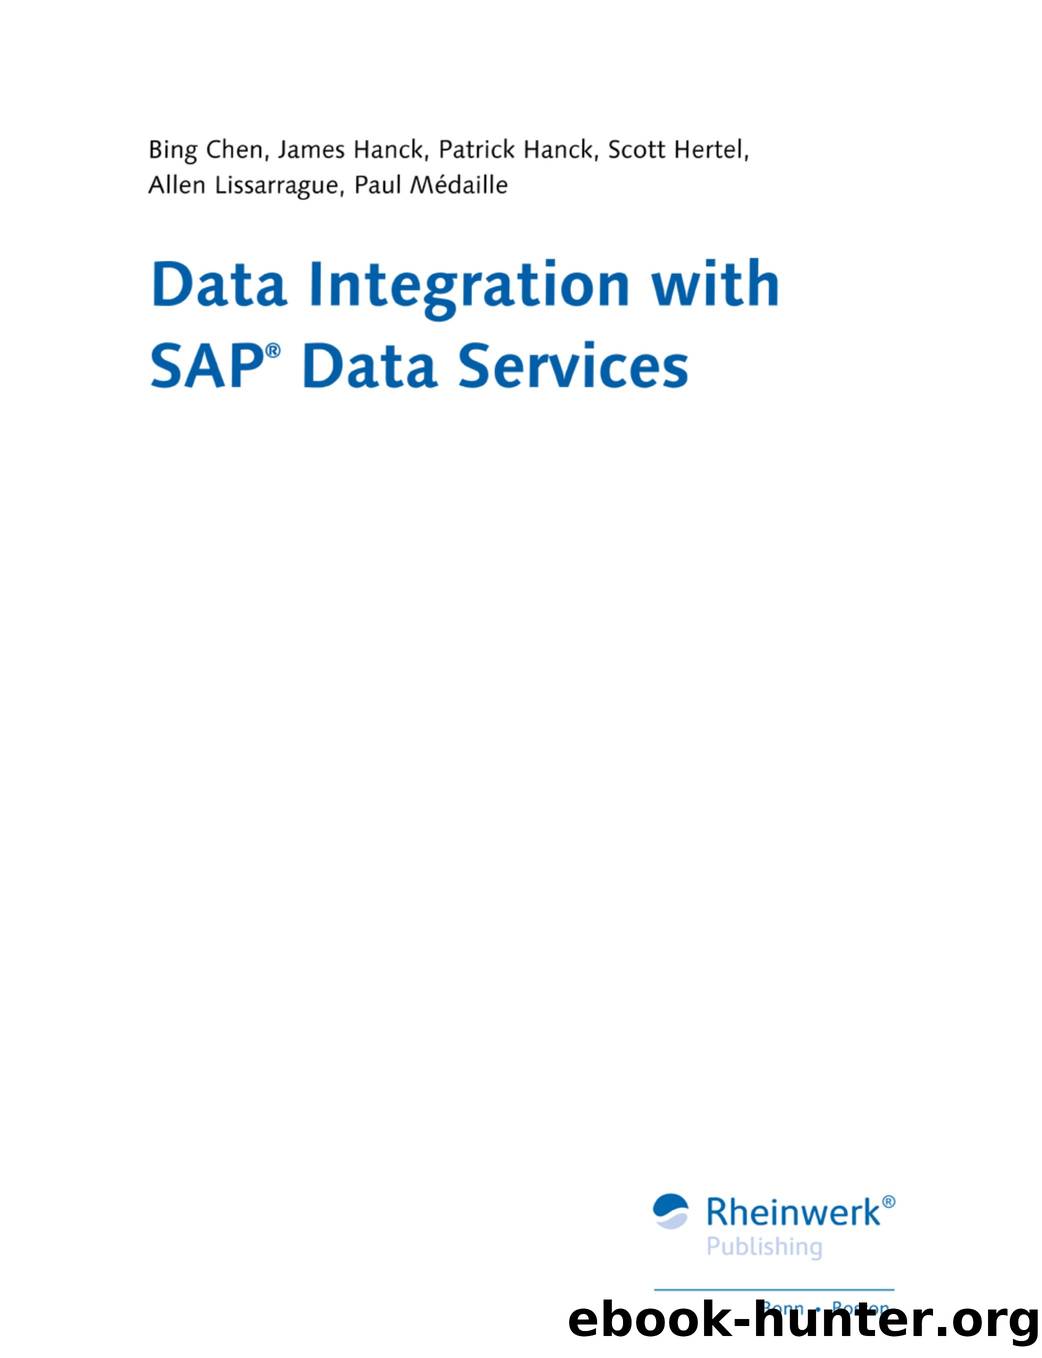 Data Integration with SAP Data Services by Unknown